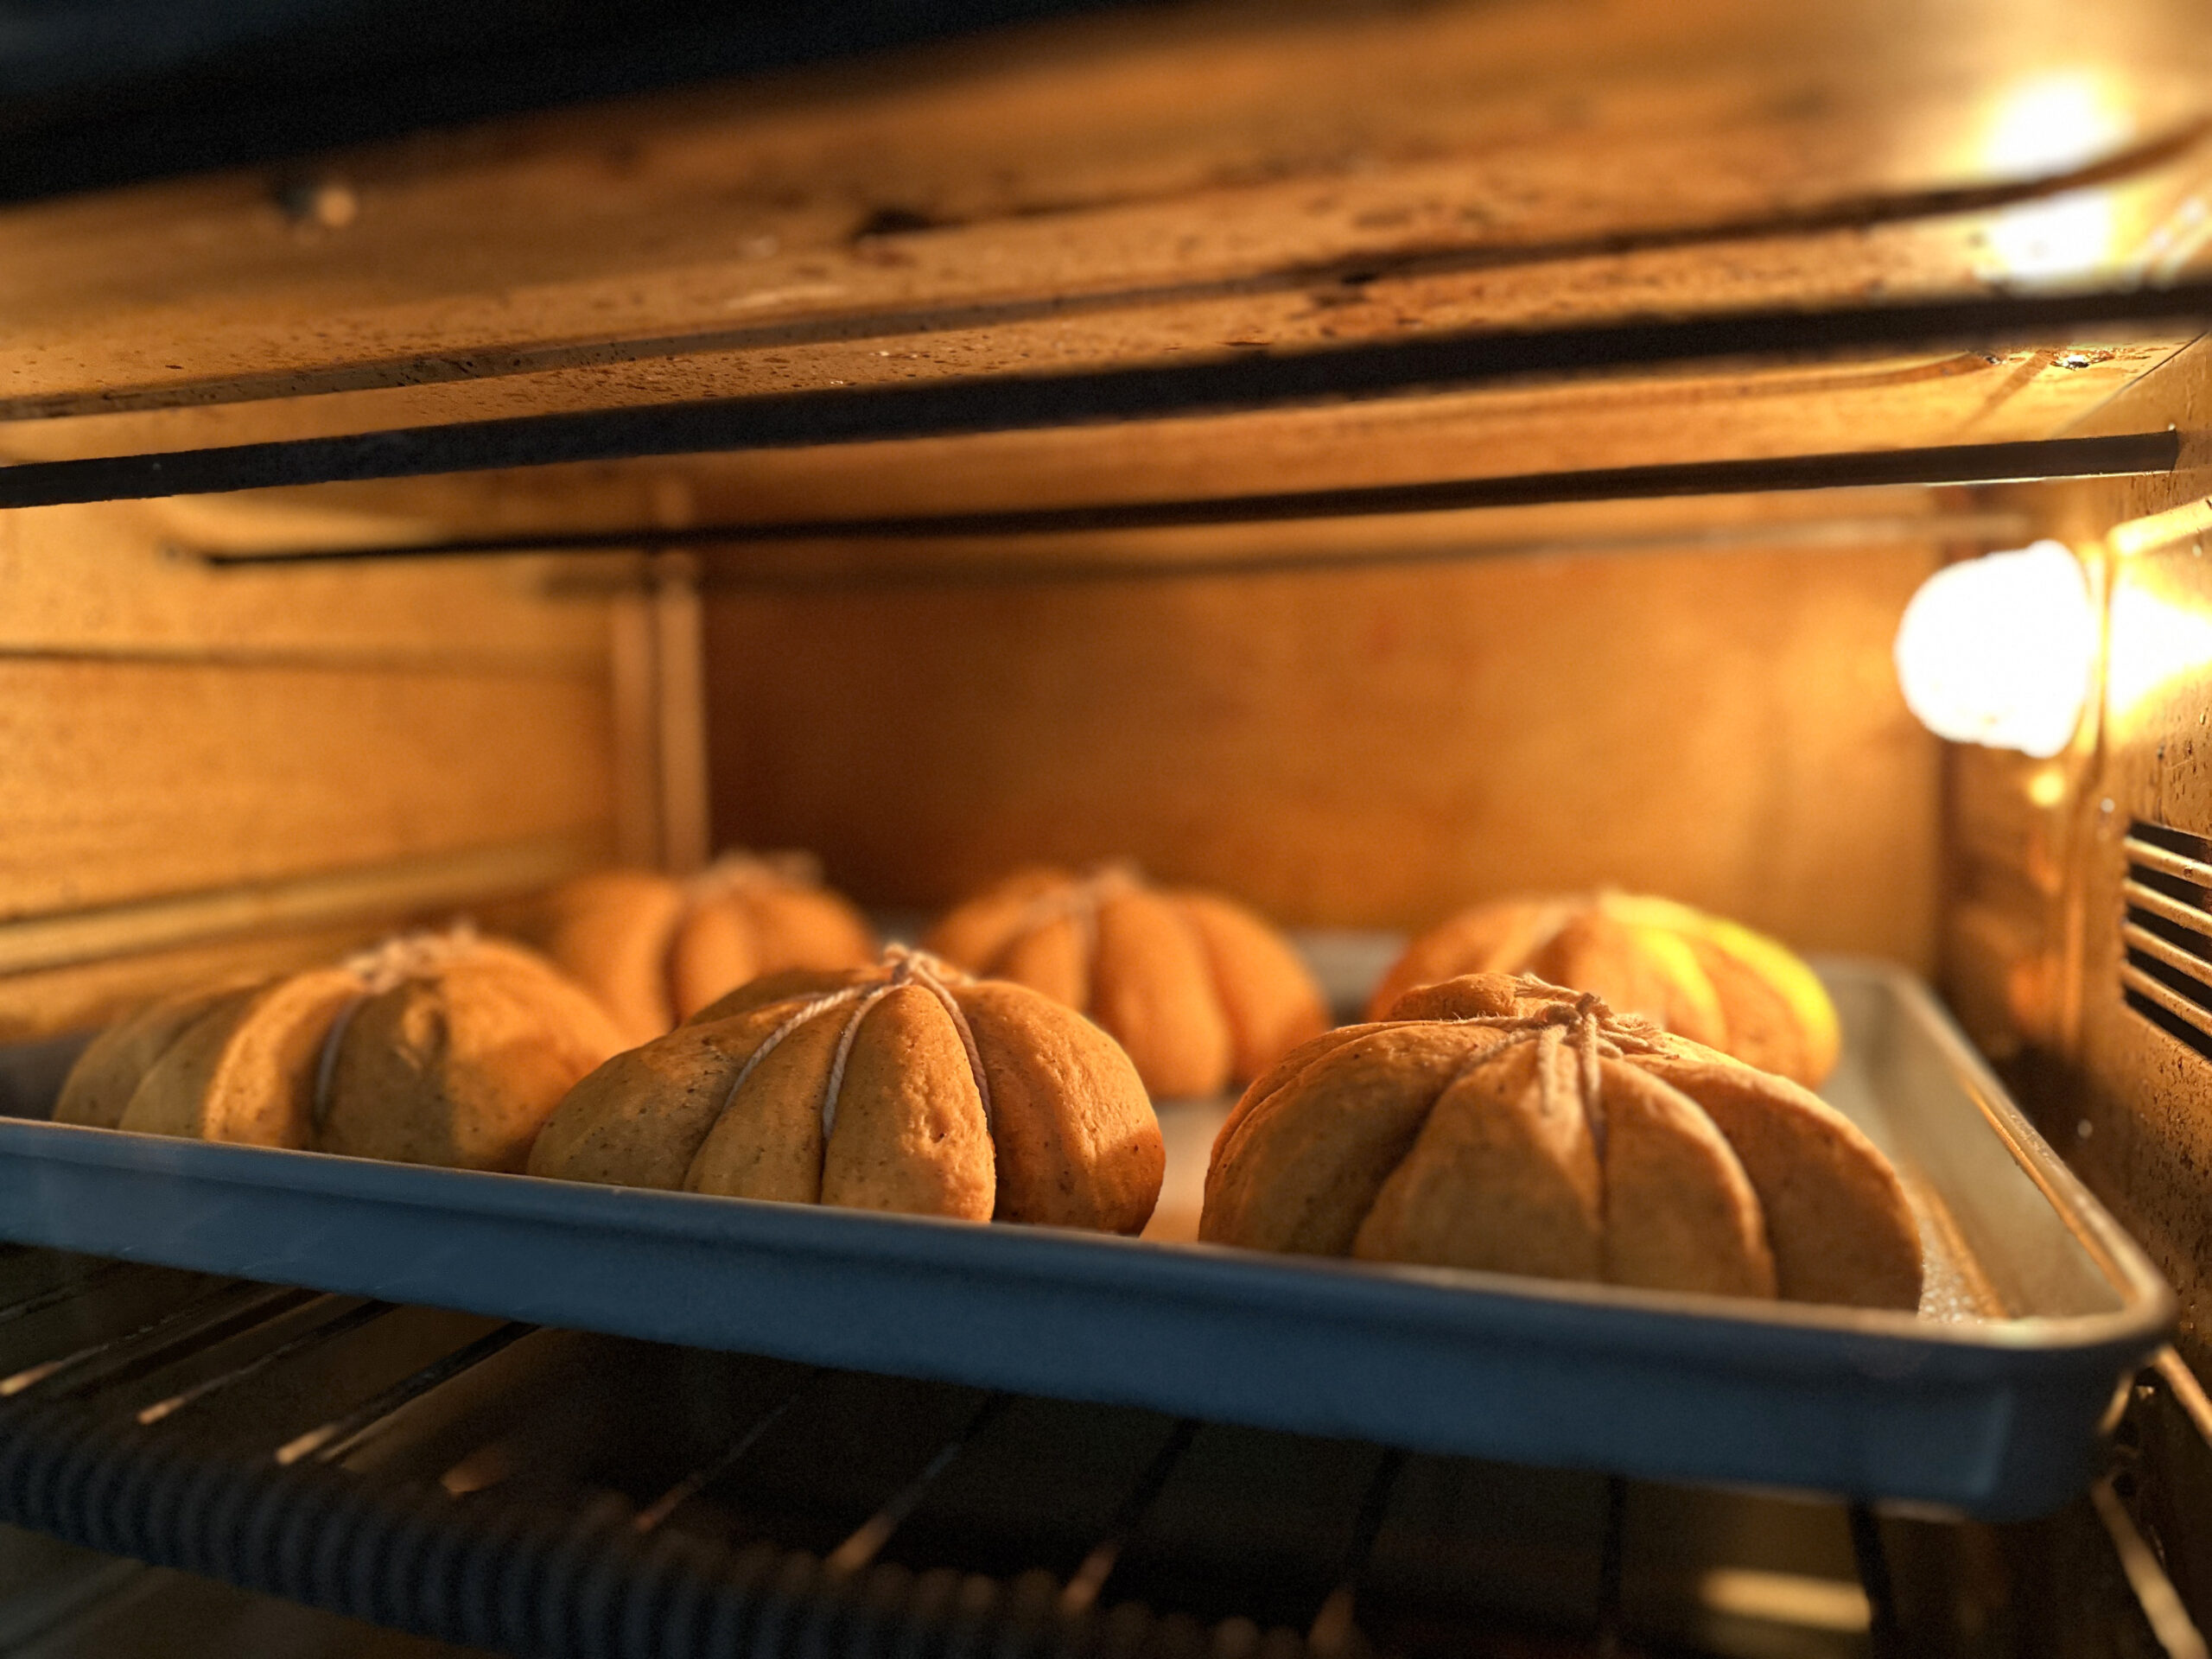 close-up view of shelf inside of a hot oven with bread